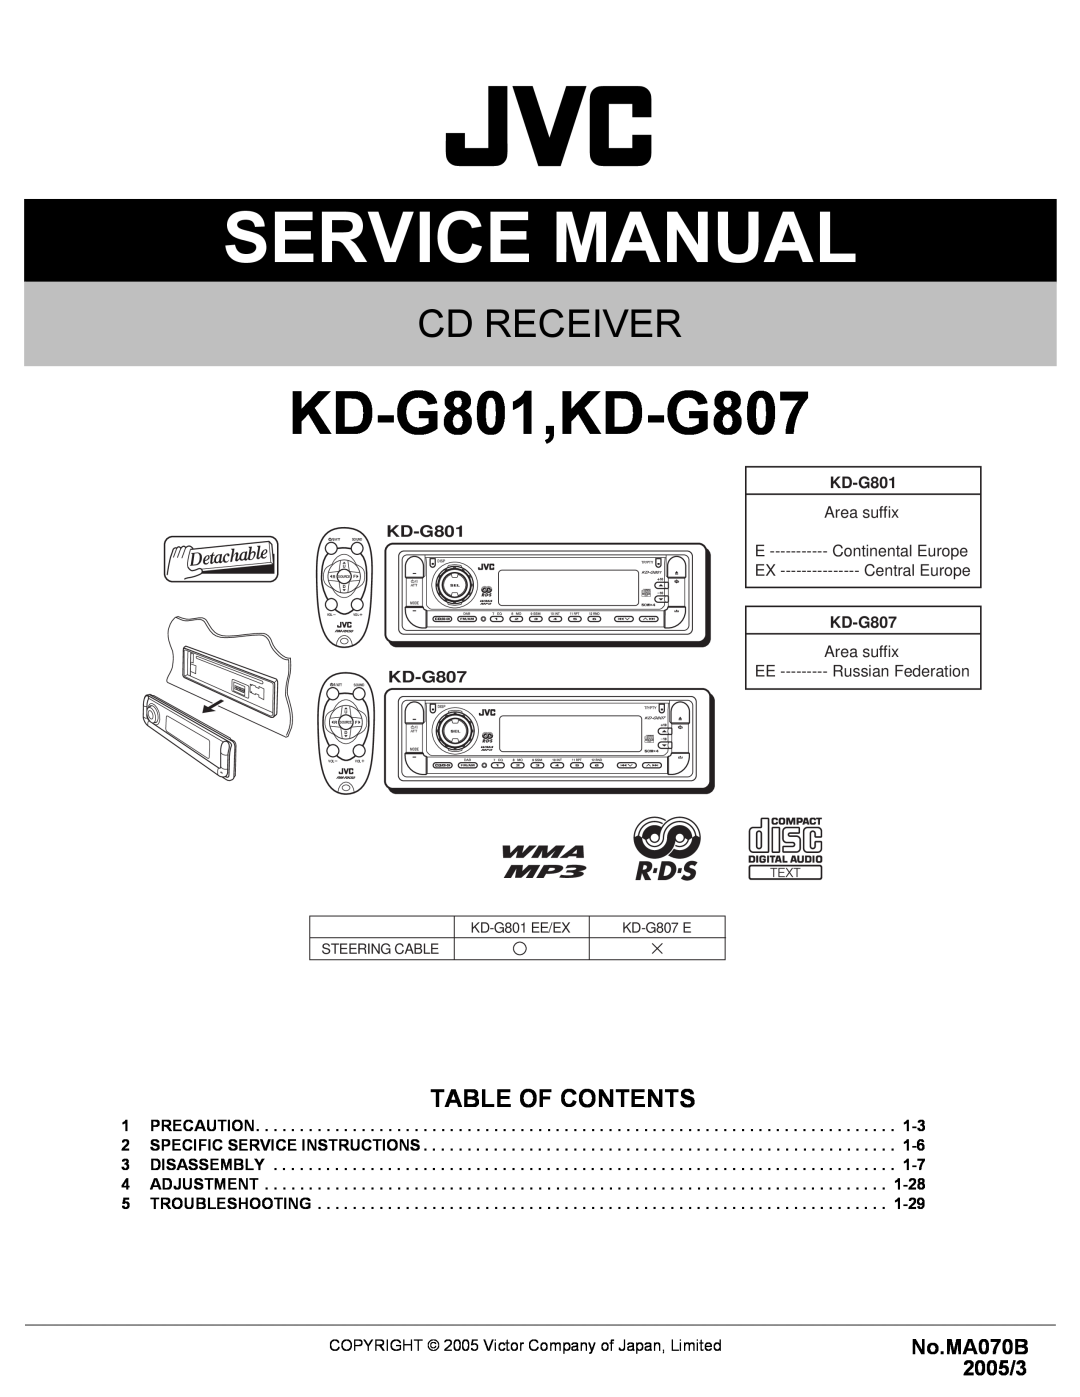 JVC service manual No.MA070B 2005/3, KD-G801,KD-G807, Cd Receiver, Table Of Contents 